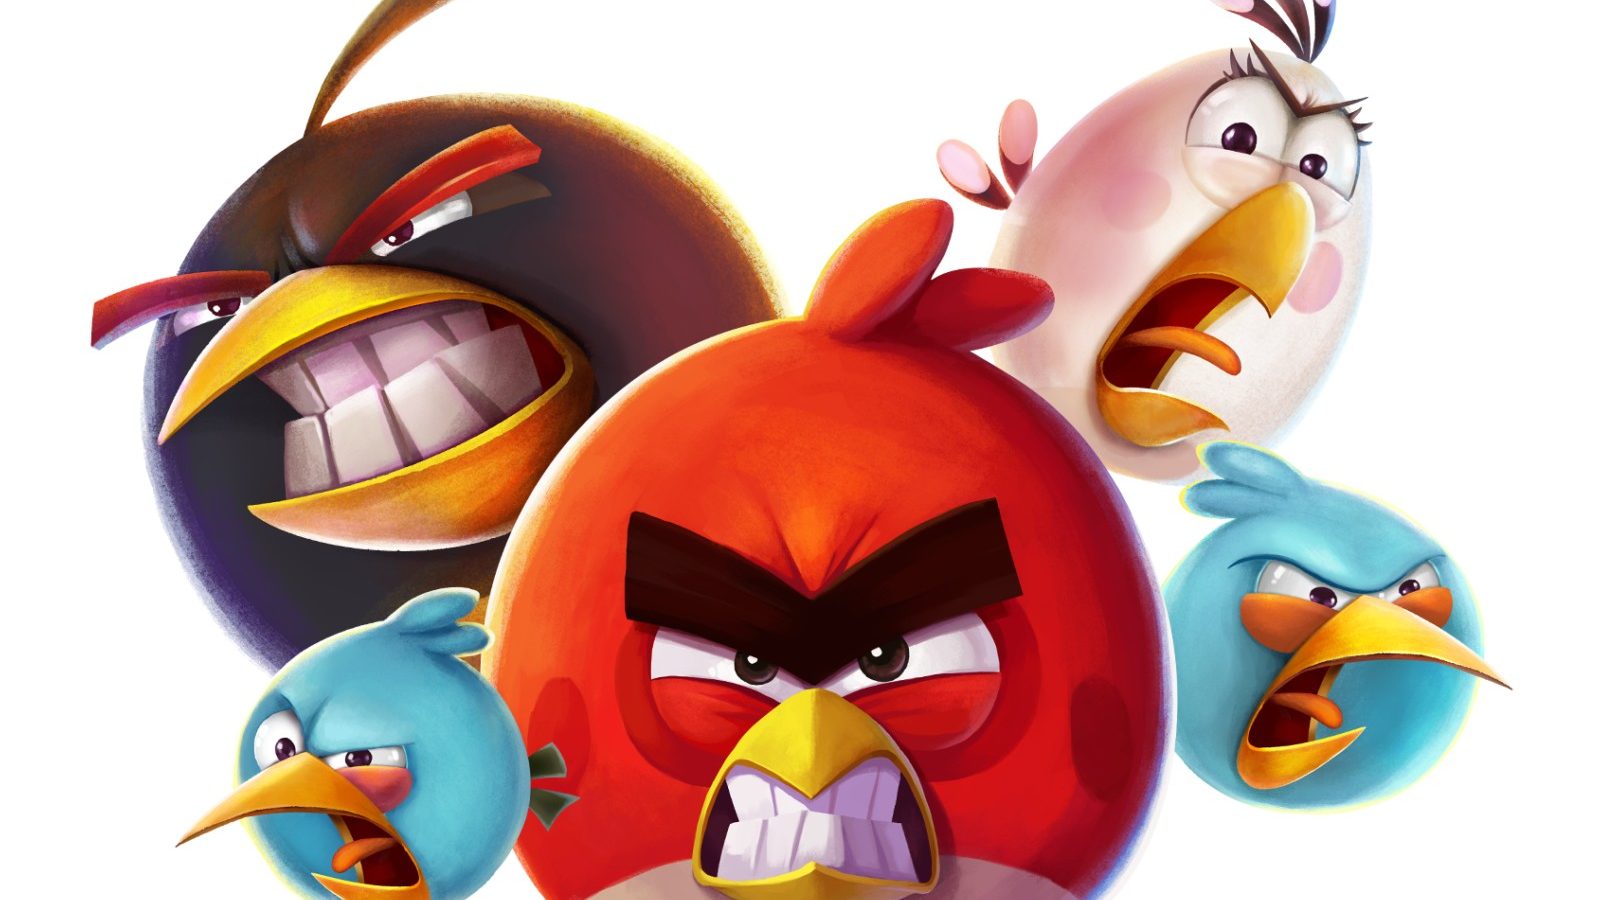 Angry Birds Developer Reports High Growth Again - News18